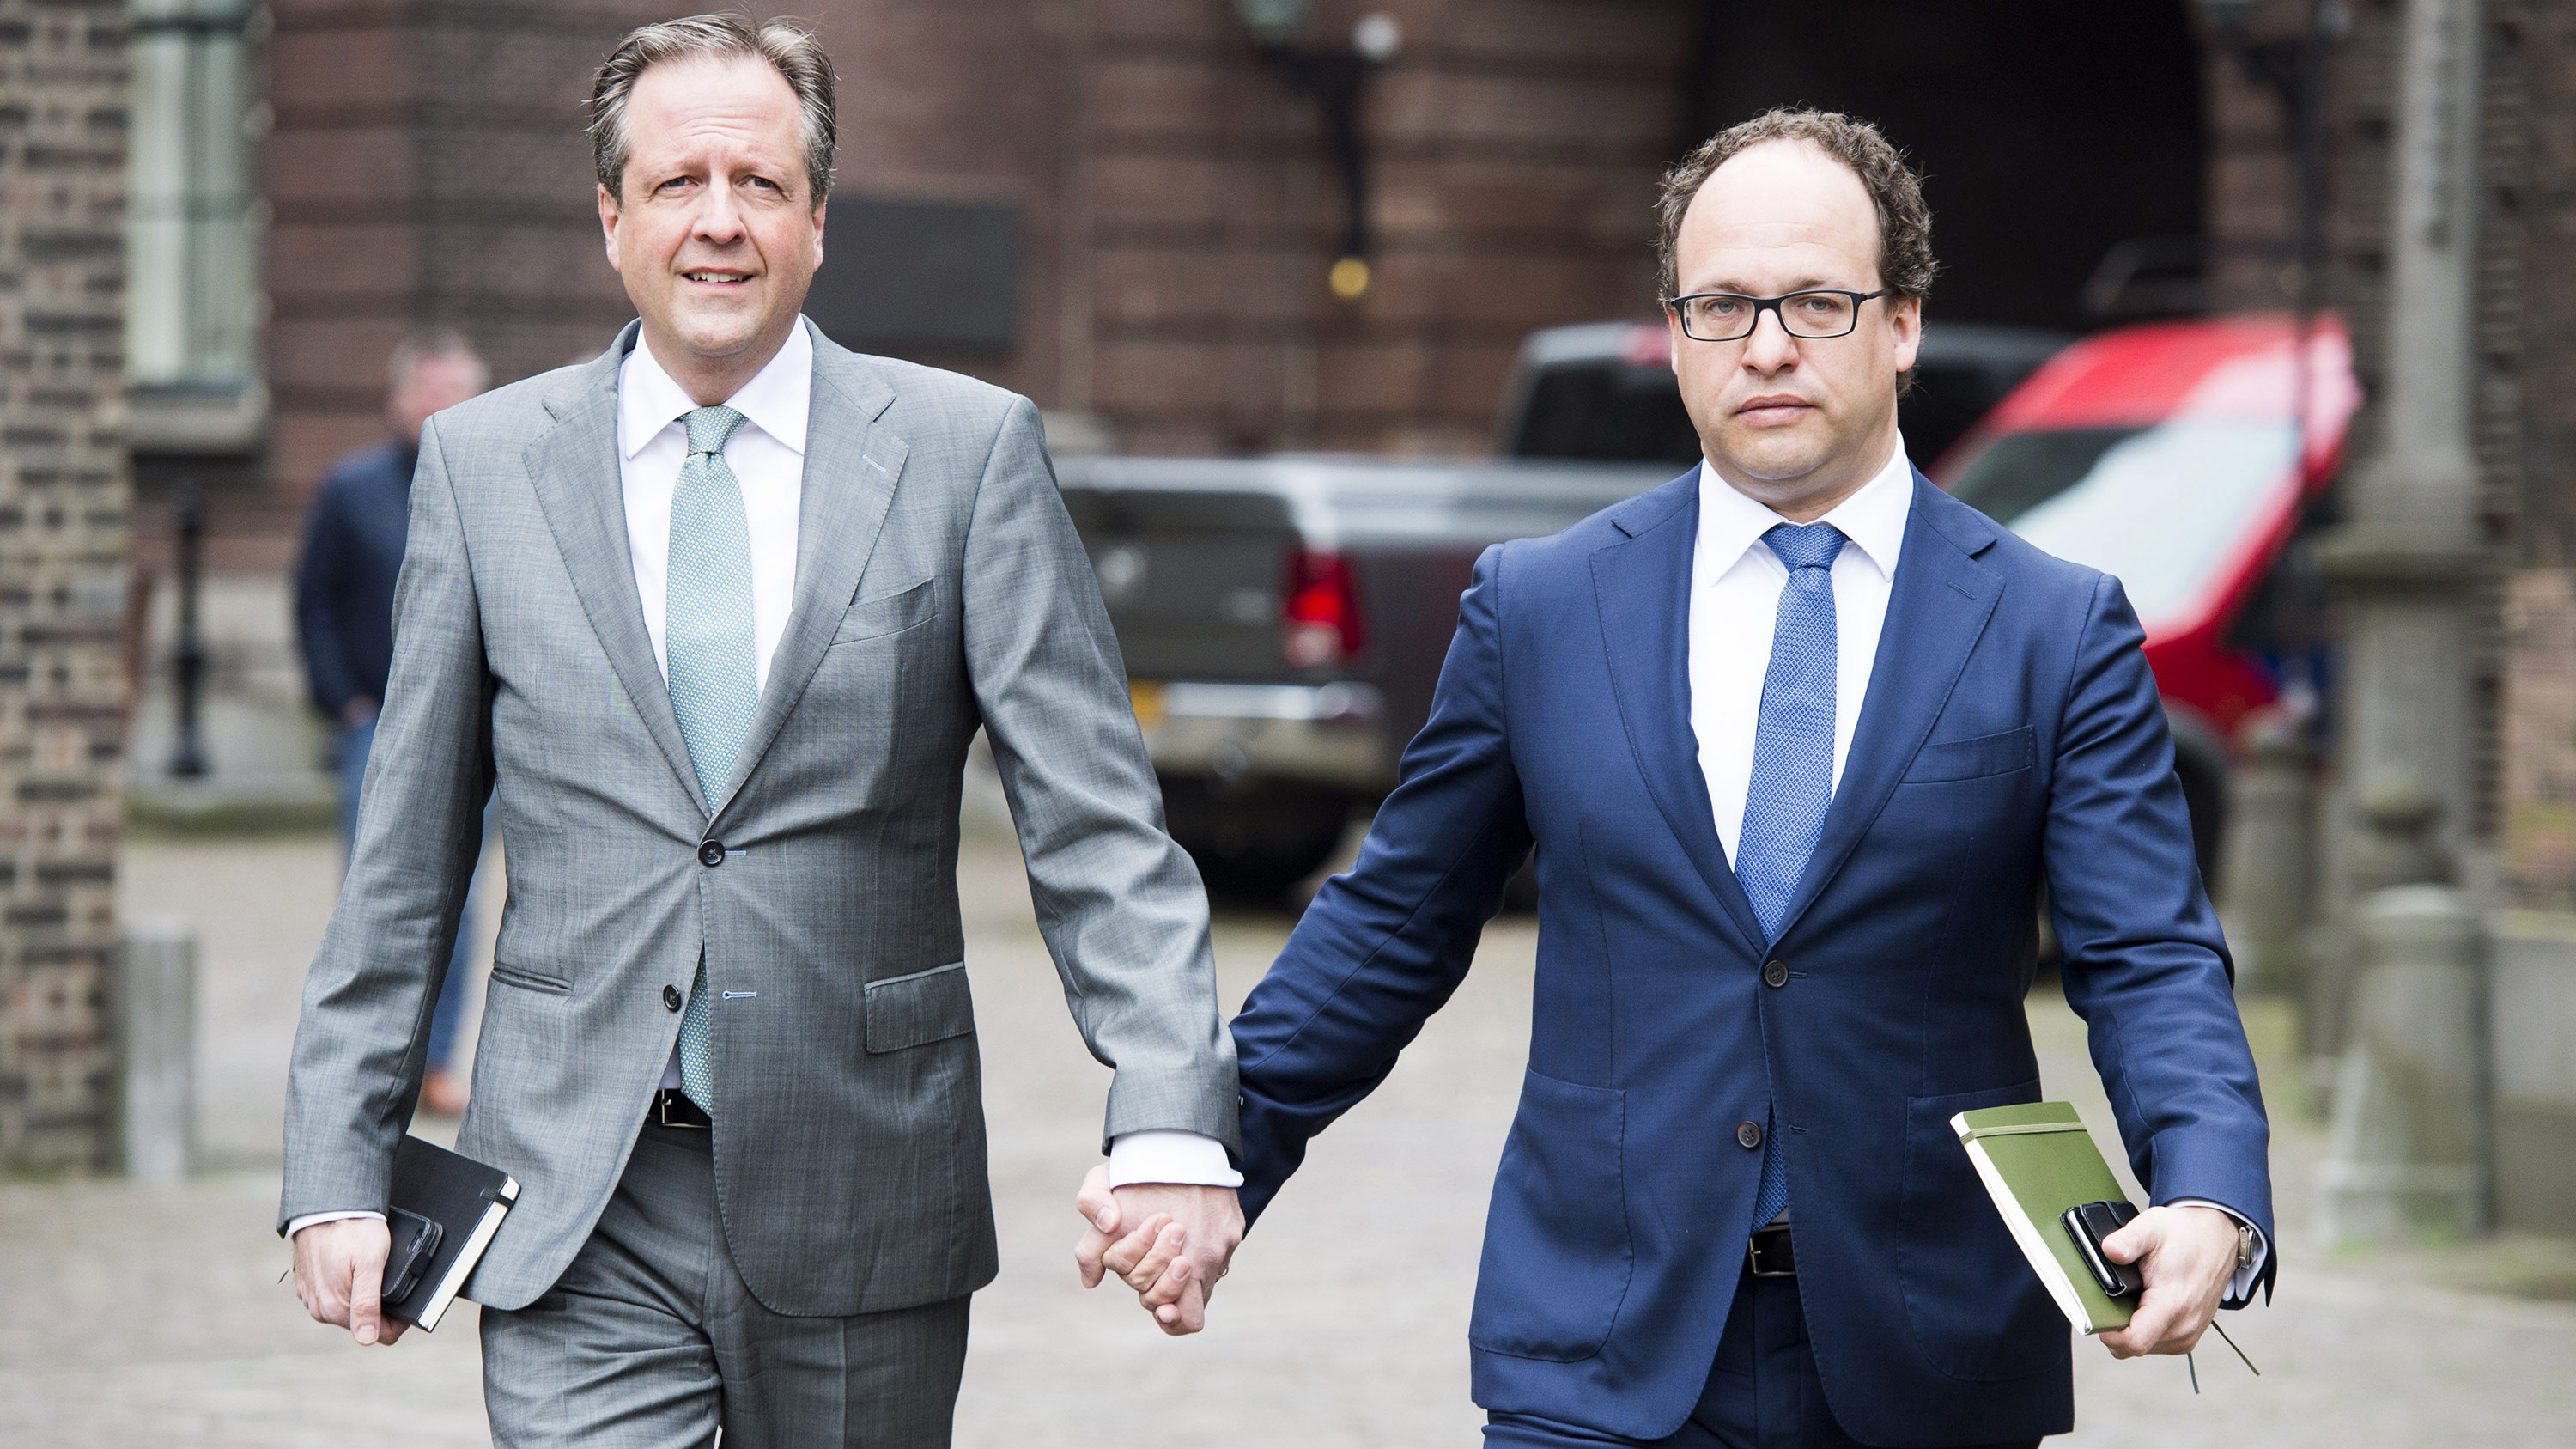 Dutch Men Are Holding Hands In Solidarity With Gay Couple